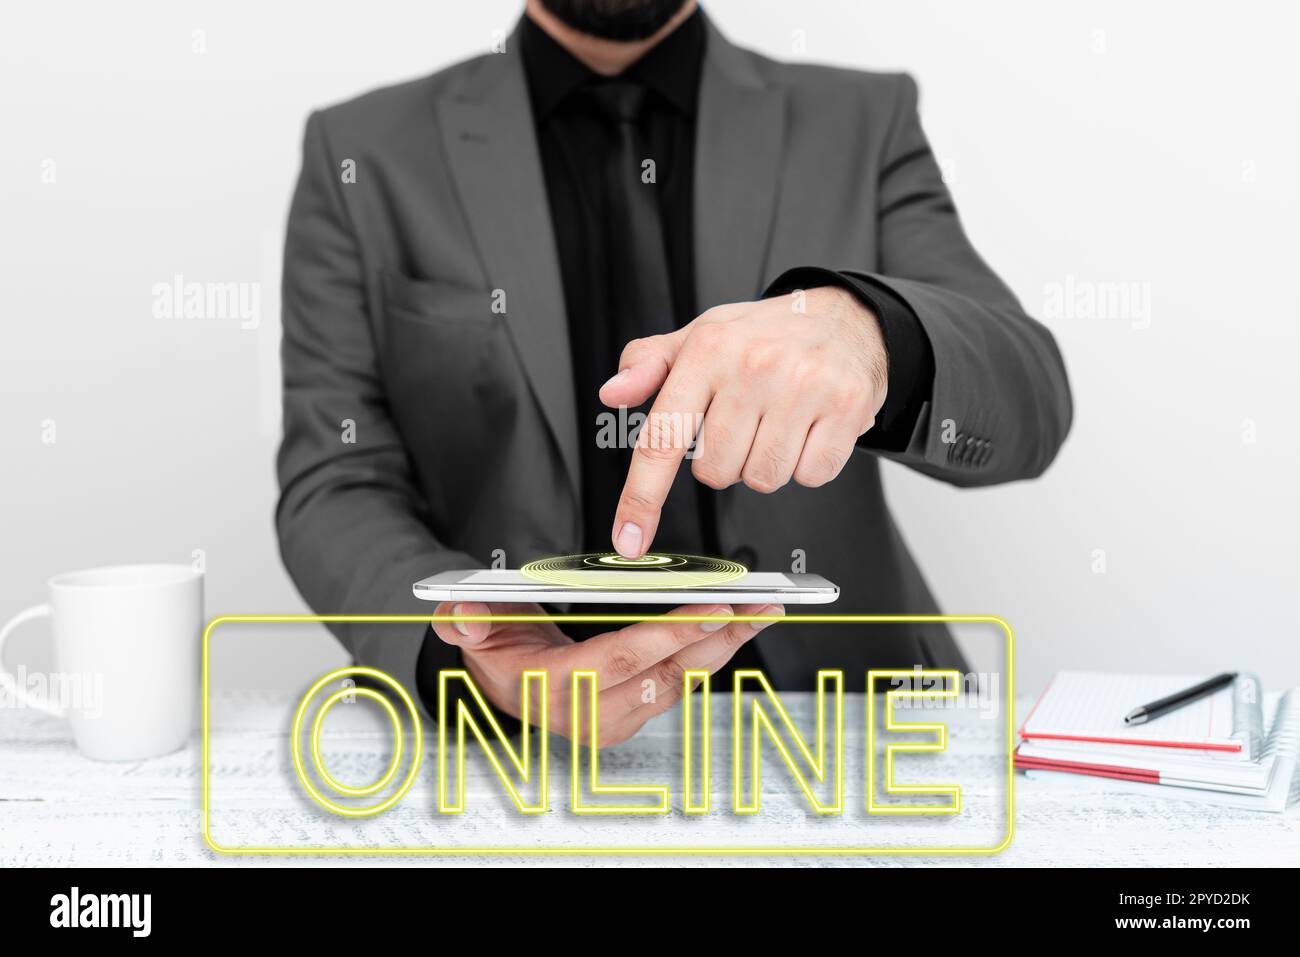 Inspiration showing sign Online. Business approach while connected to computer or under computer control On internet Stock Photo